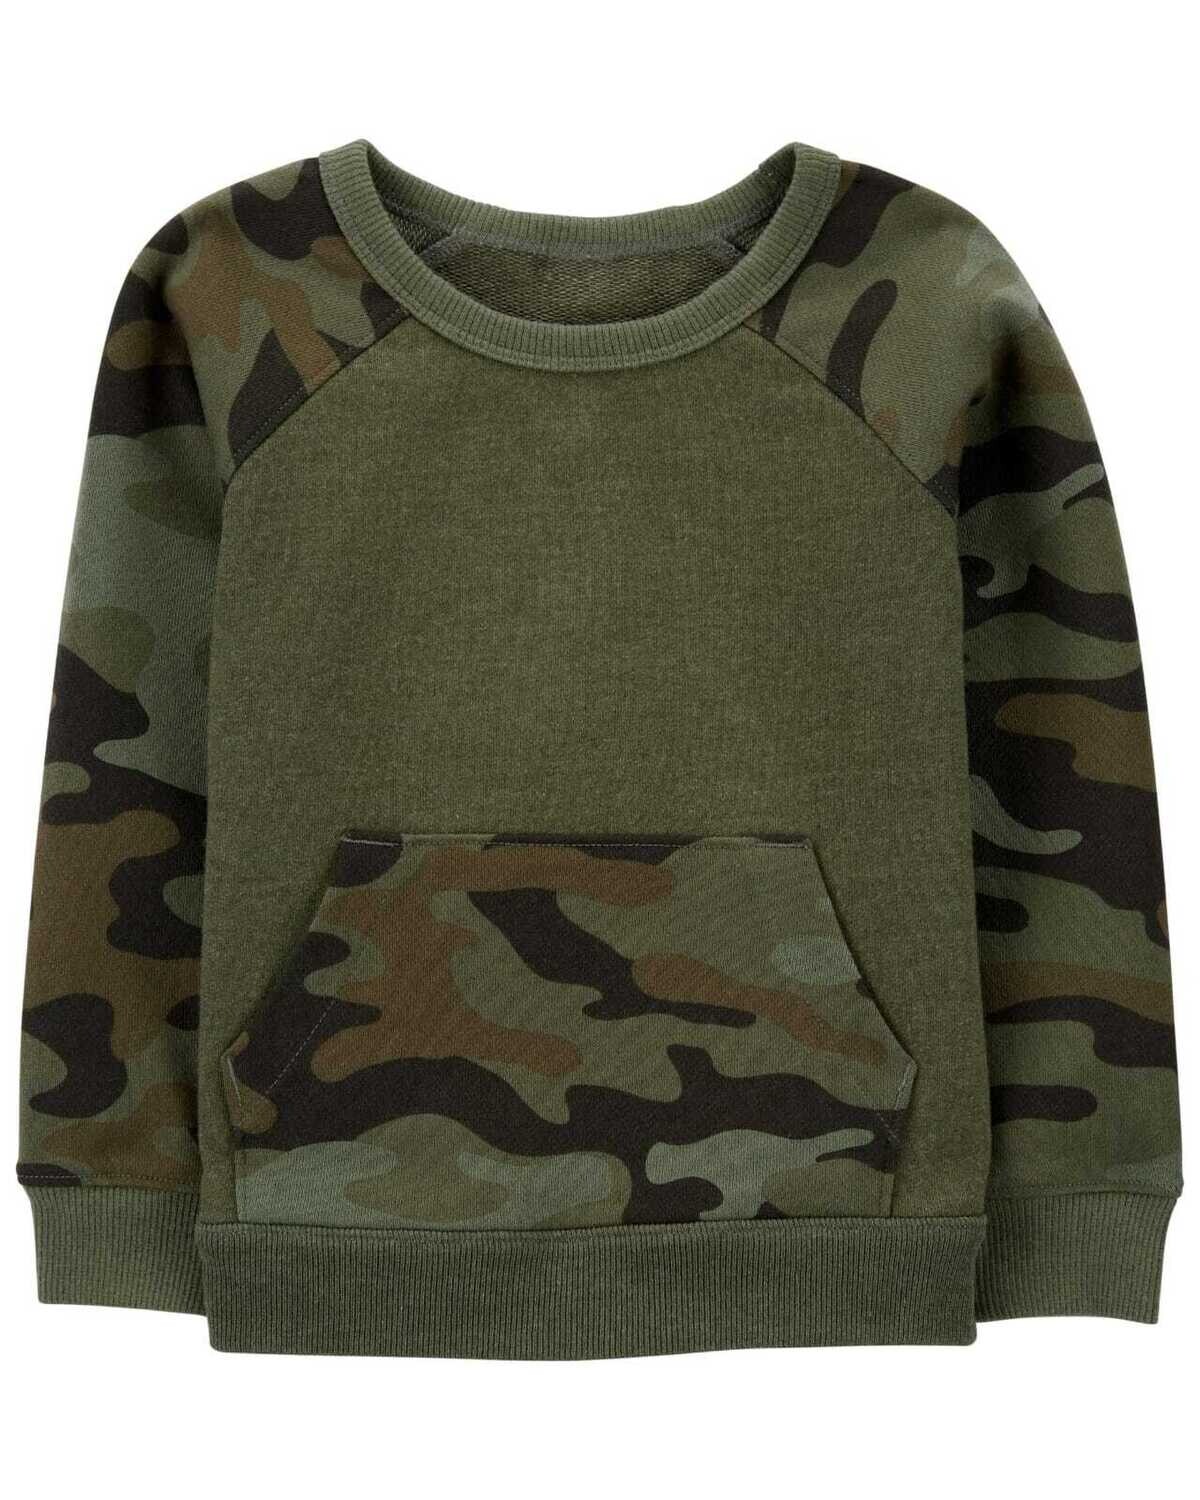 Original Carter's Baby Boy Olive Came French Terry Pullover